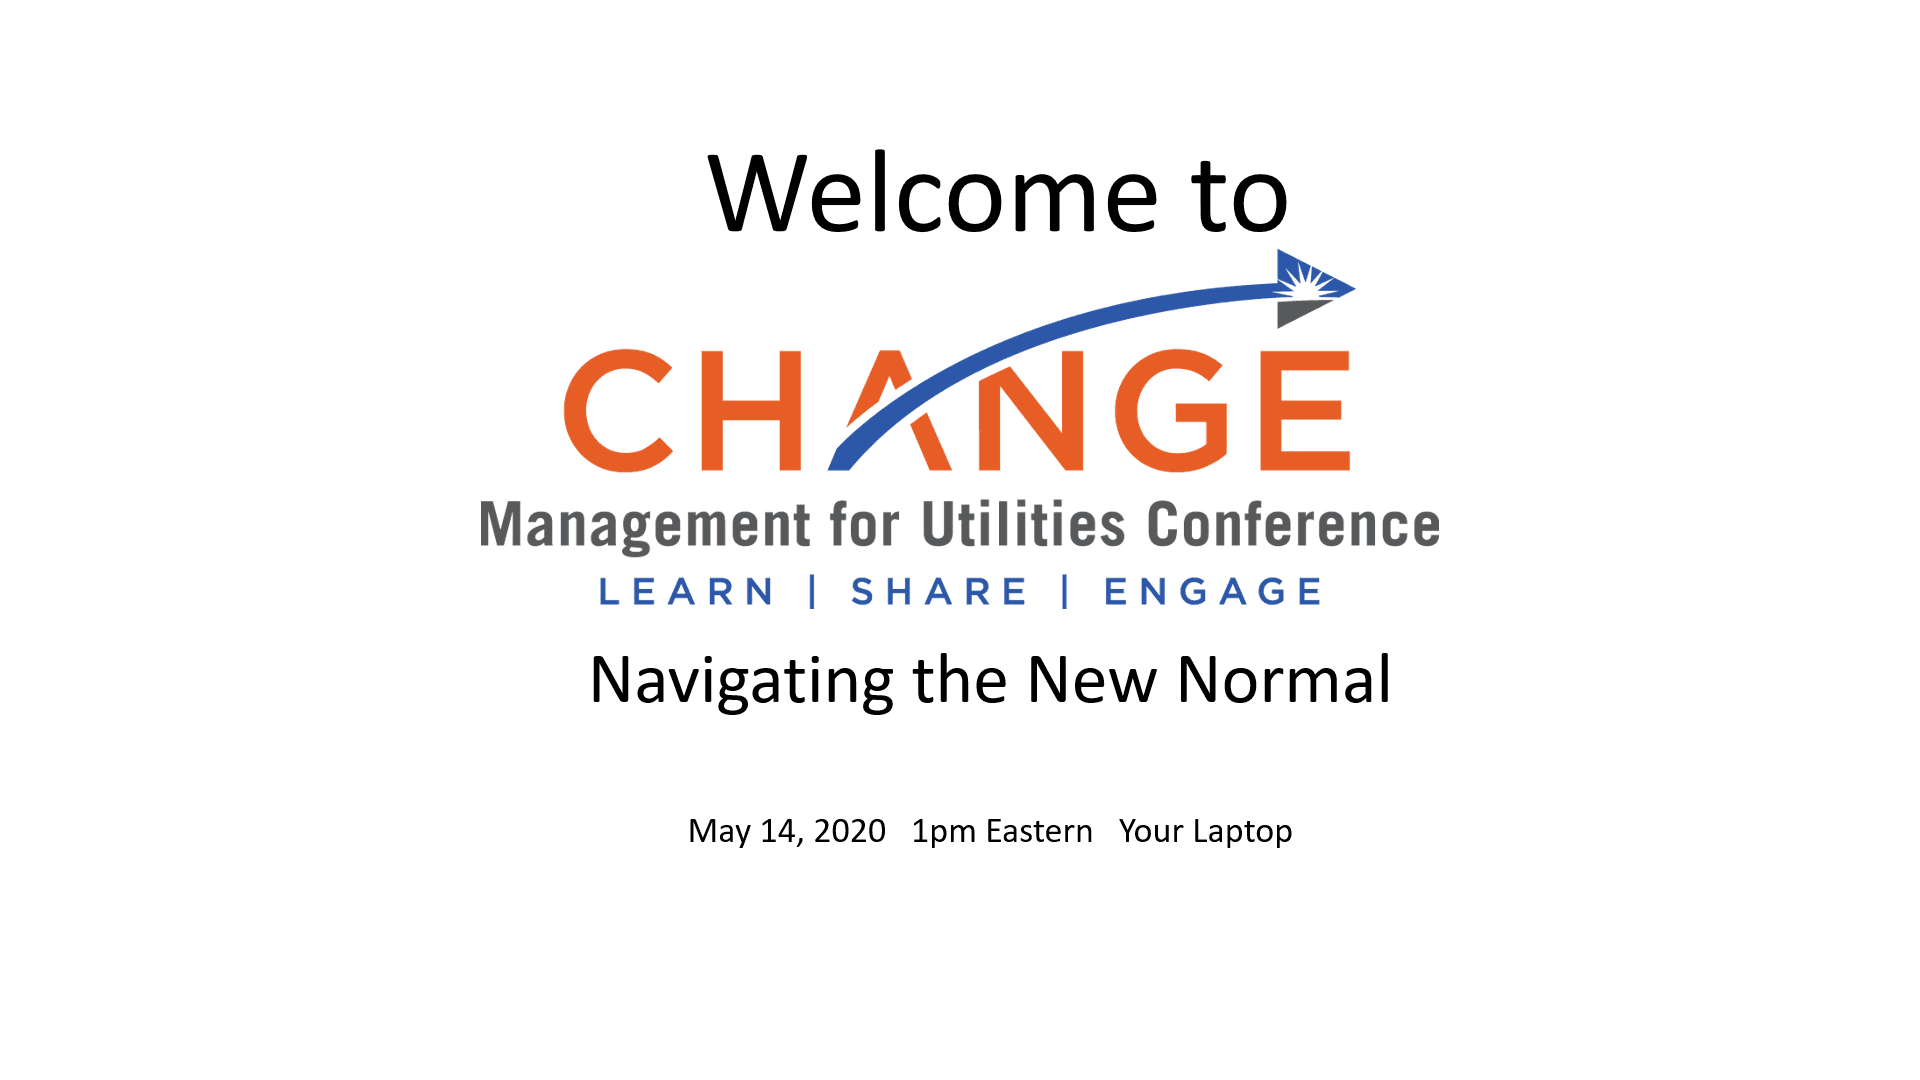 Product Change Management for Utilities: Navigating the New Normal Video and Presentations - UtilityEvents.com image